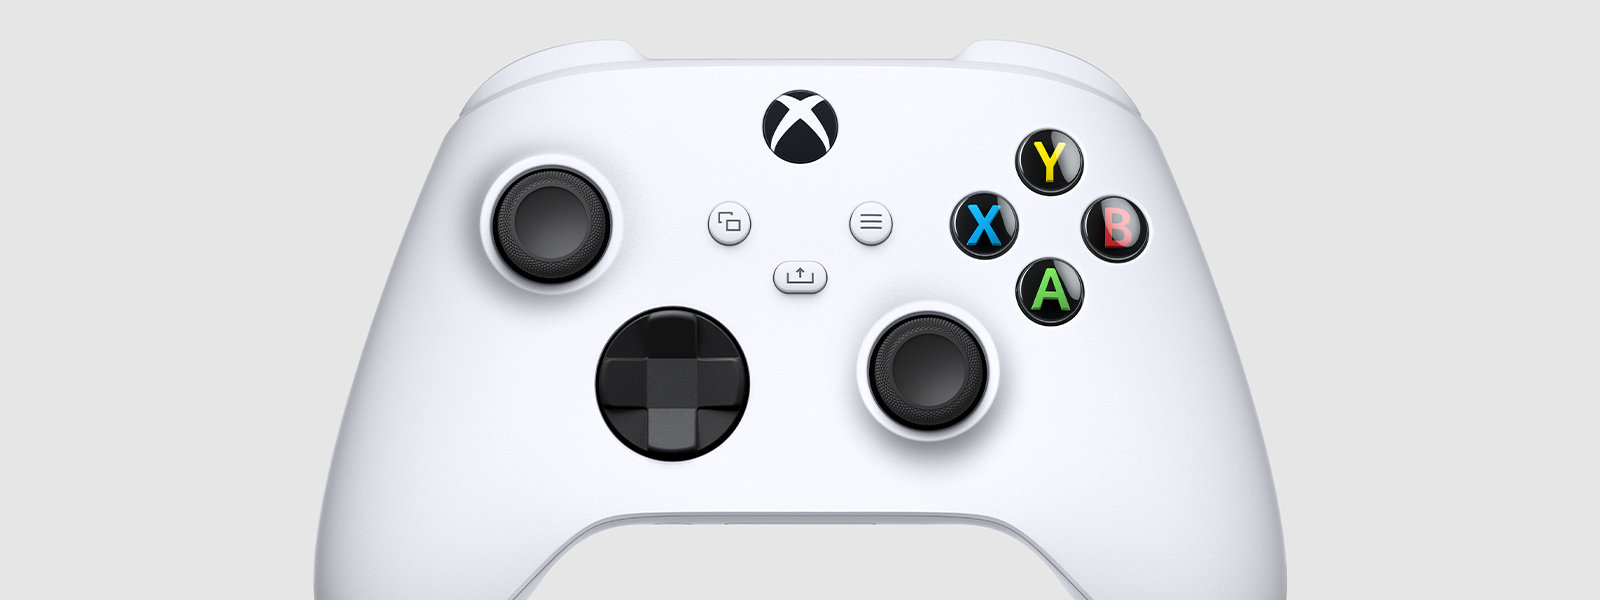 Close-up view of the control buttons on the Xbox Wireless Controller. 